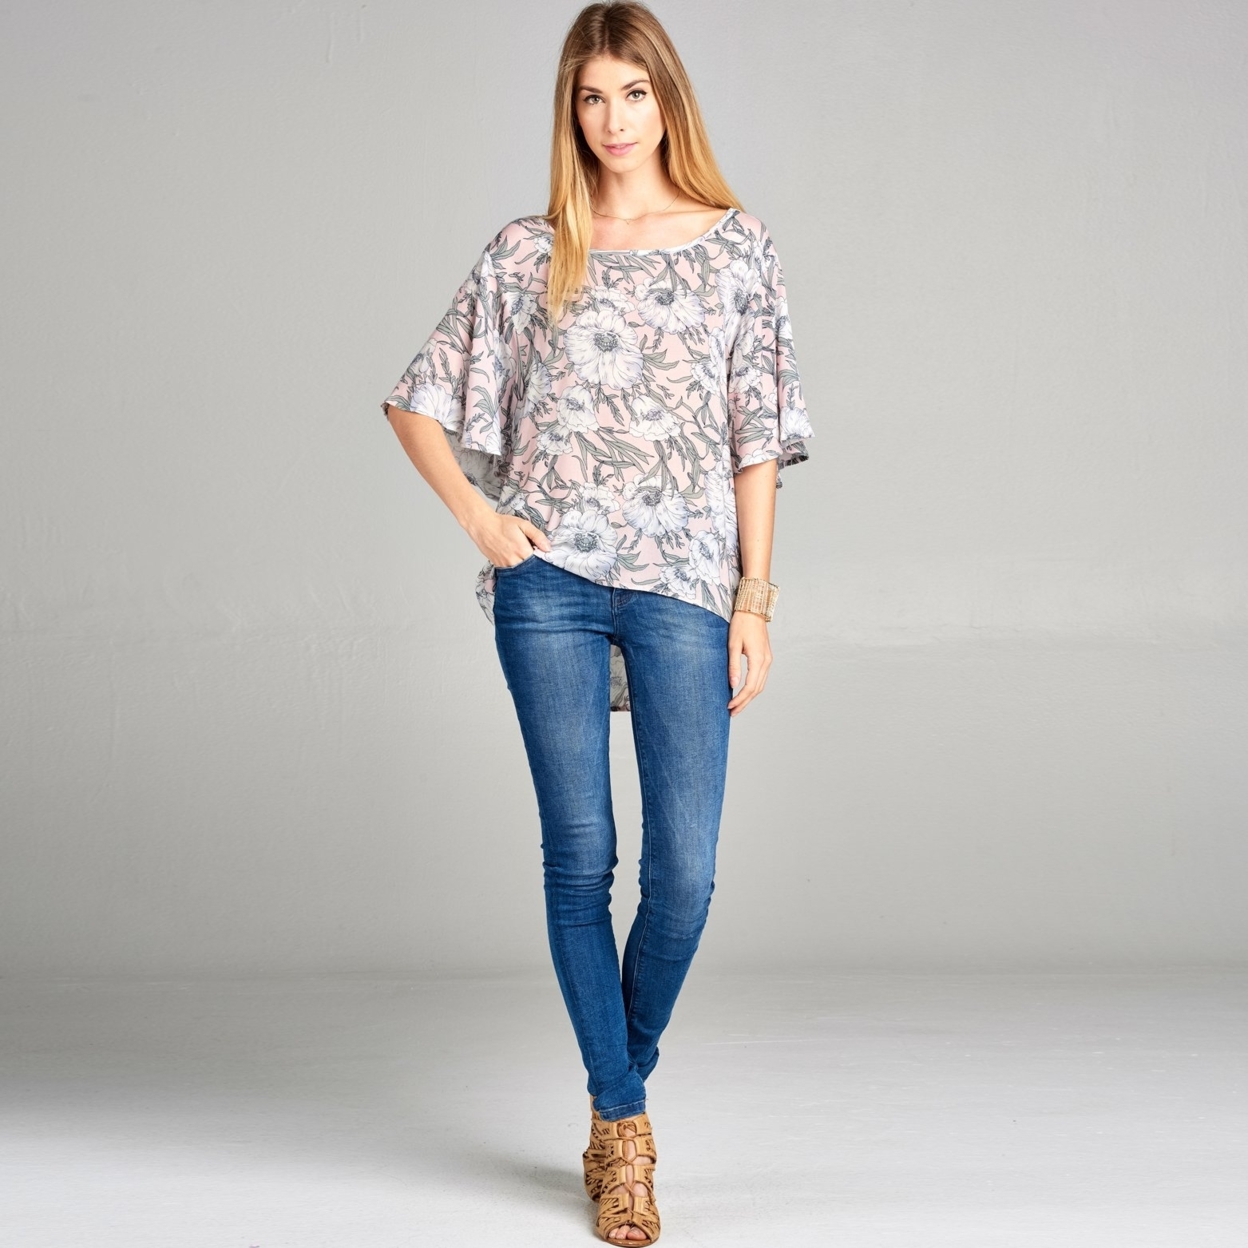 Butterfly Sleeve Floral Top - Dusty Pink, Large (12-14)